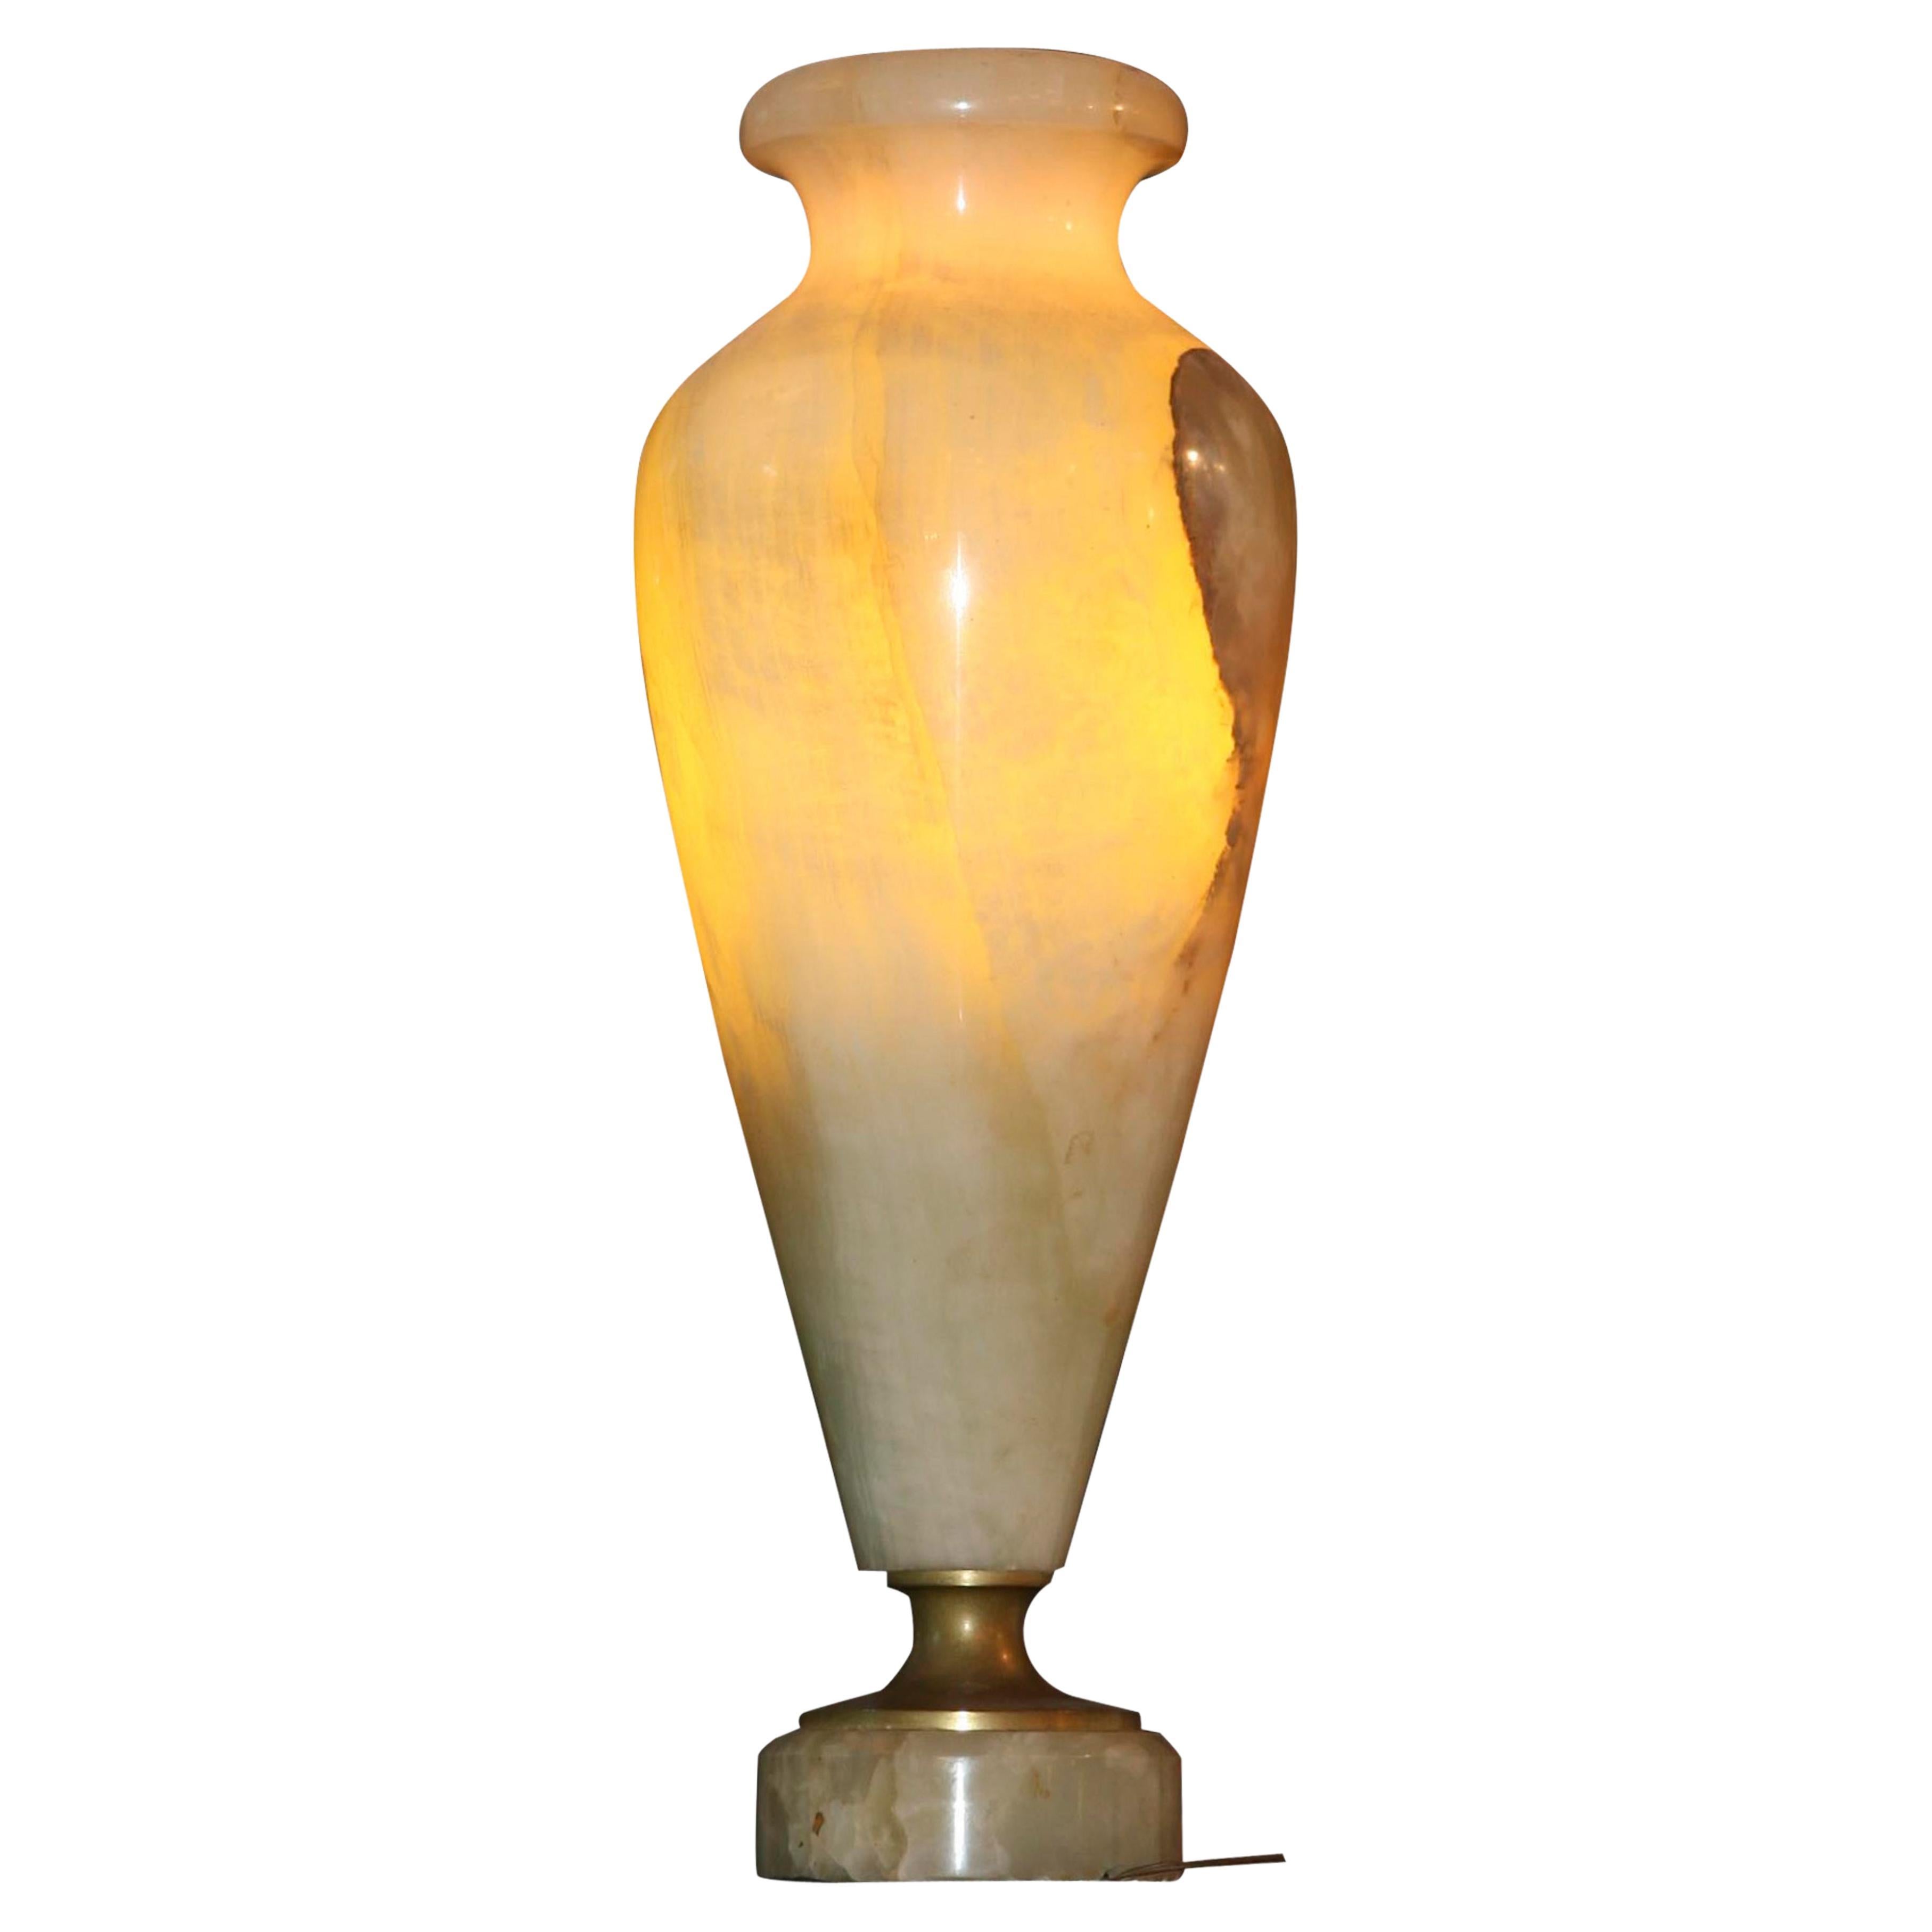 Amaizing Art deco Table Lamp in Marble, 1920, made in France